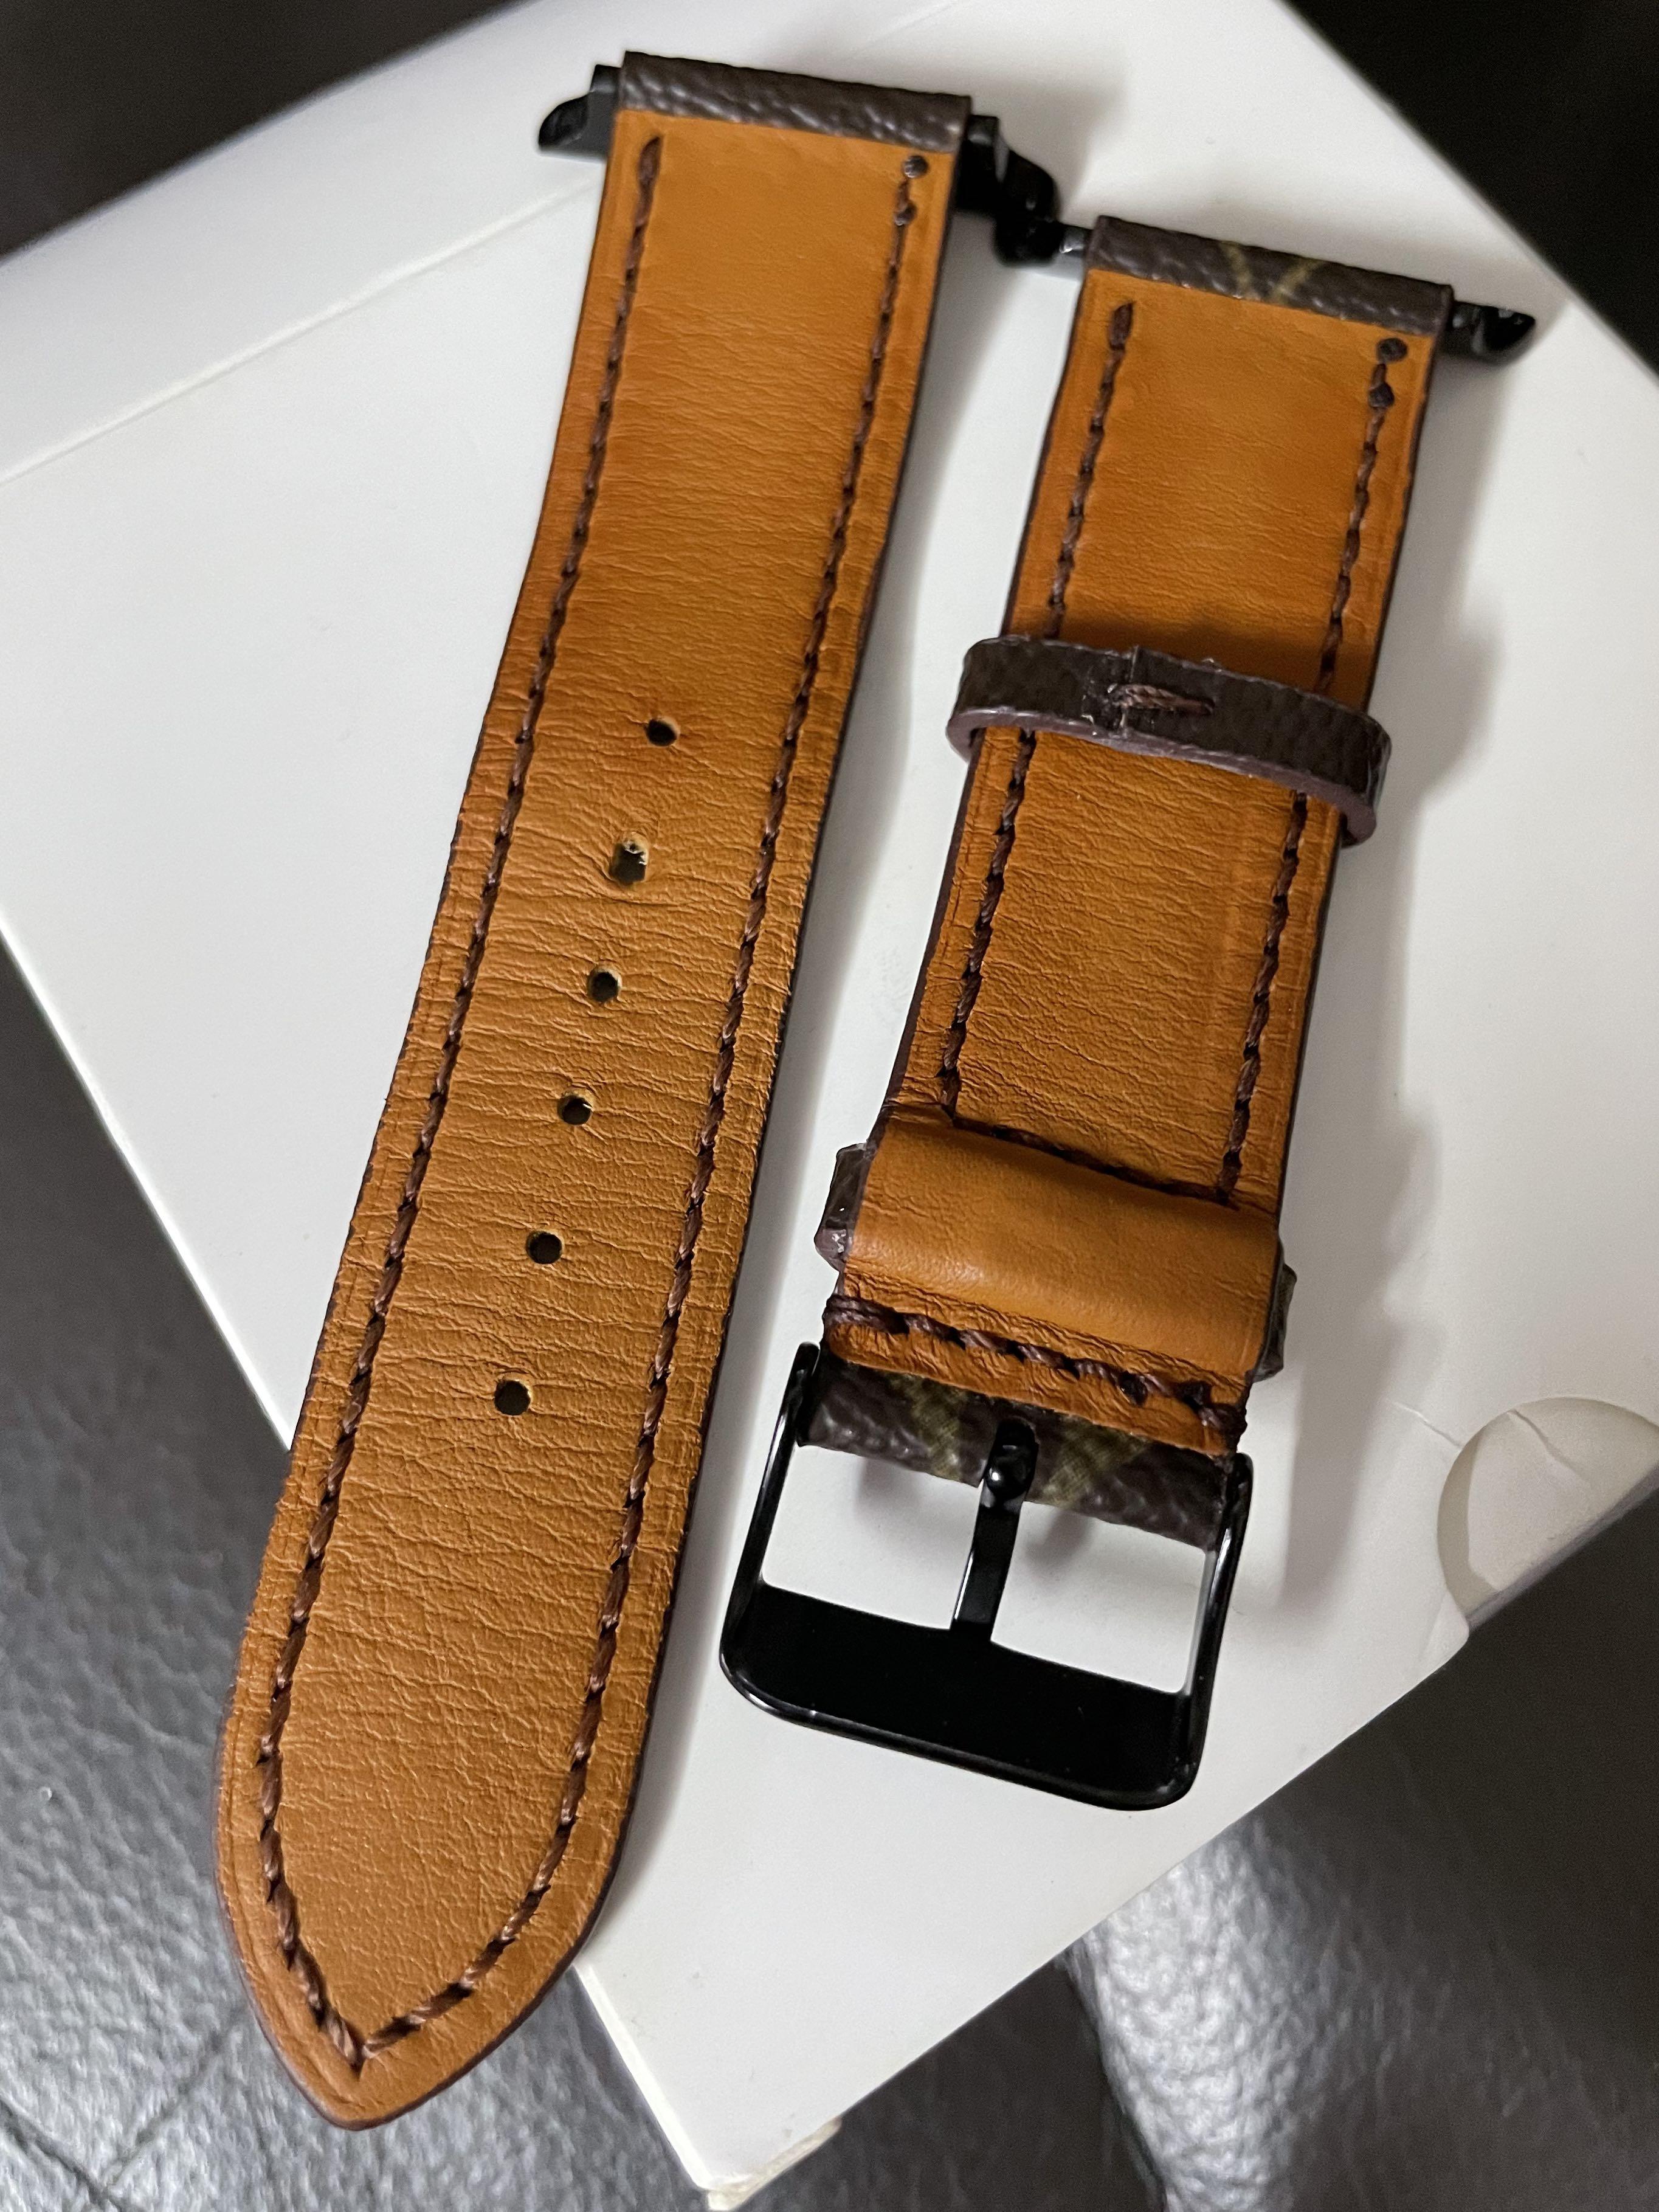 44-45mm Apple Watch strap made by 💯 Authentic Louis Vuitton canvas